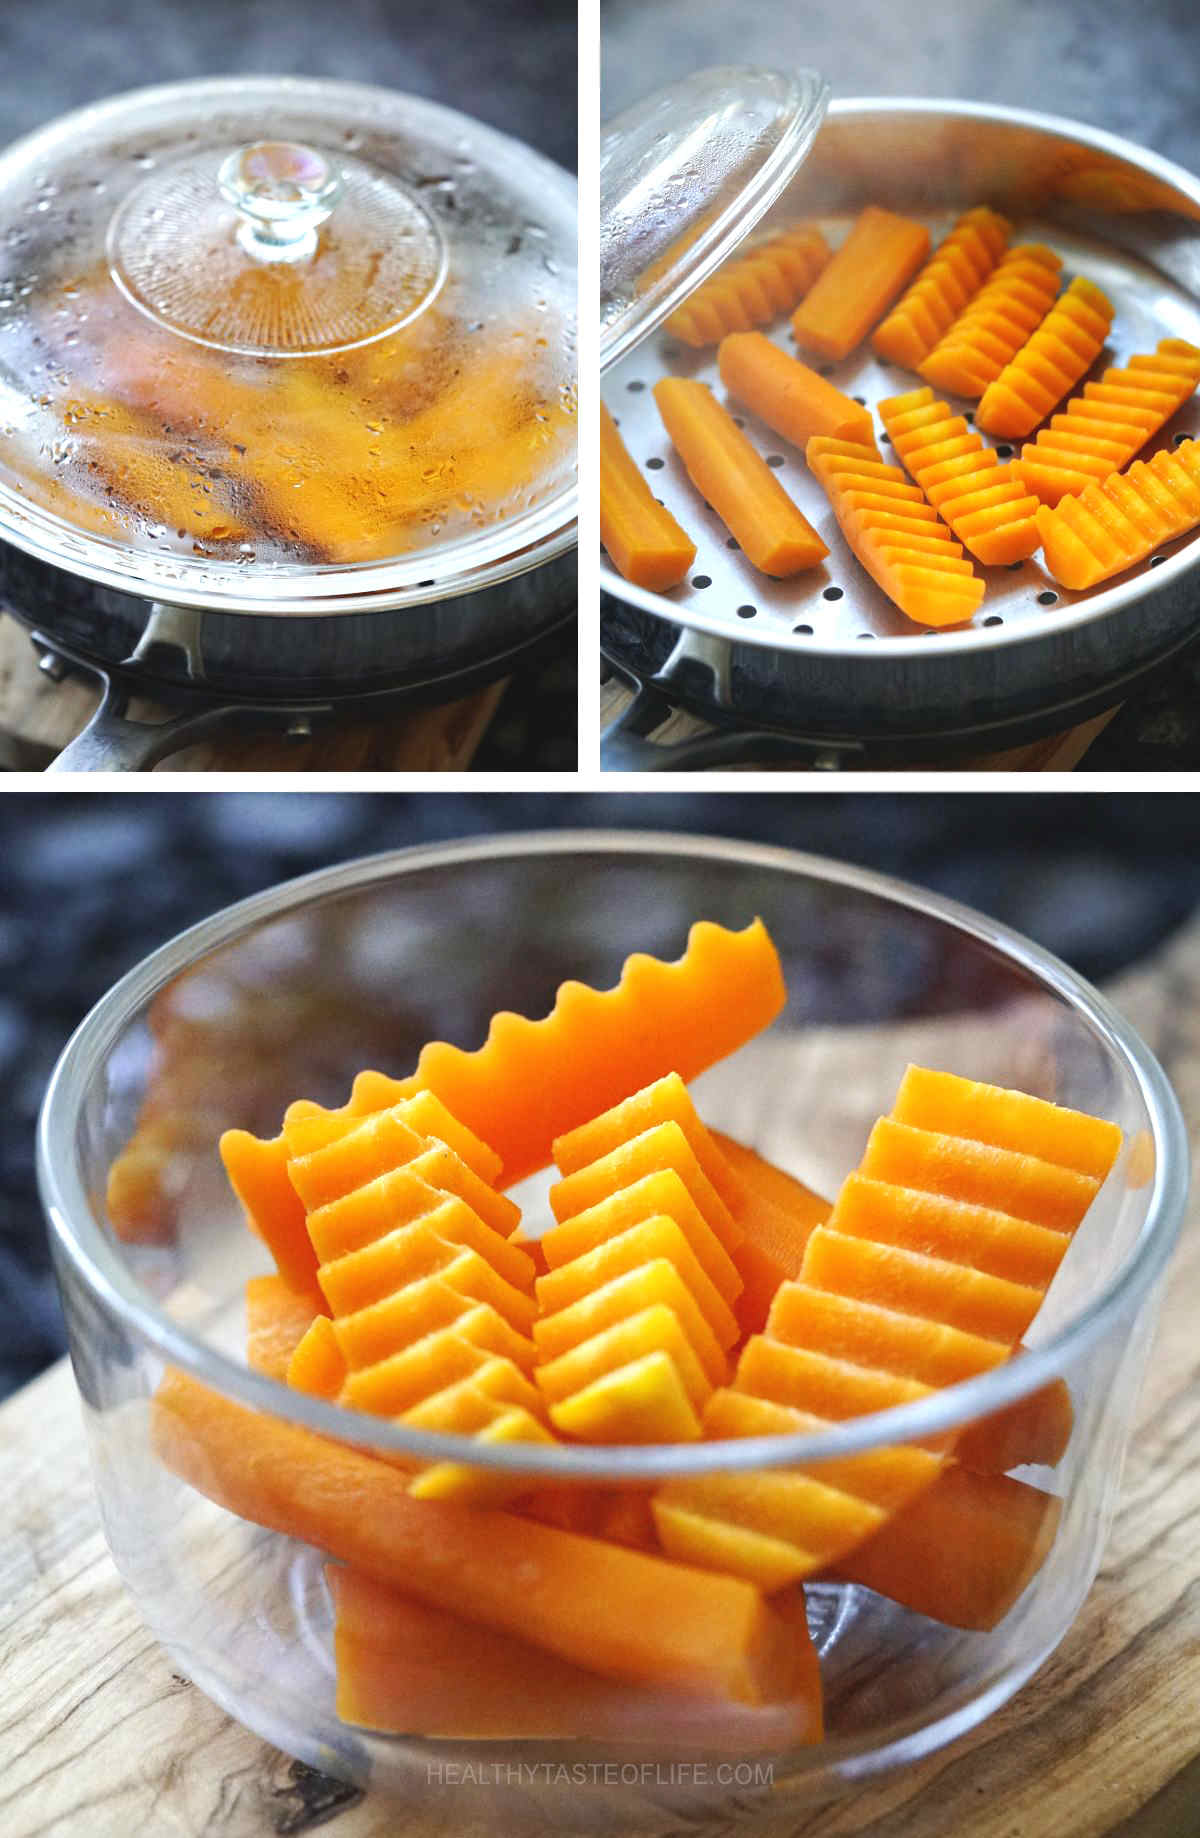 Steamed carrots sticks for baby led weaning cut with a crinkle cutter